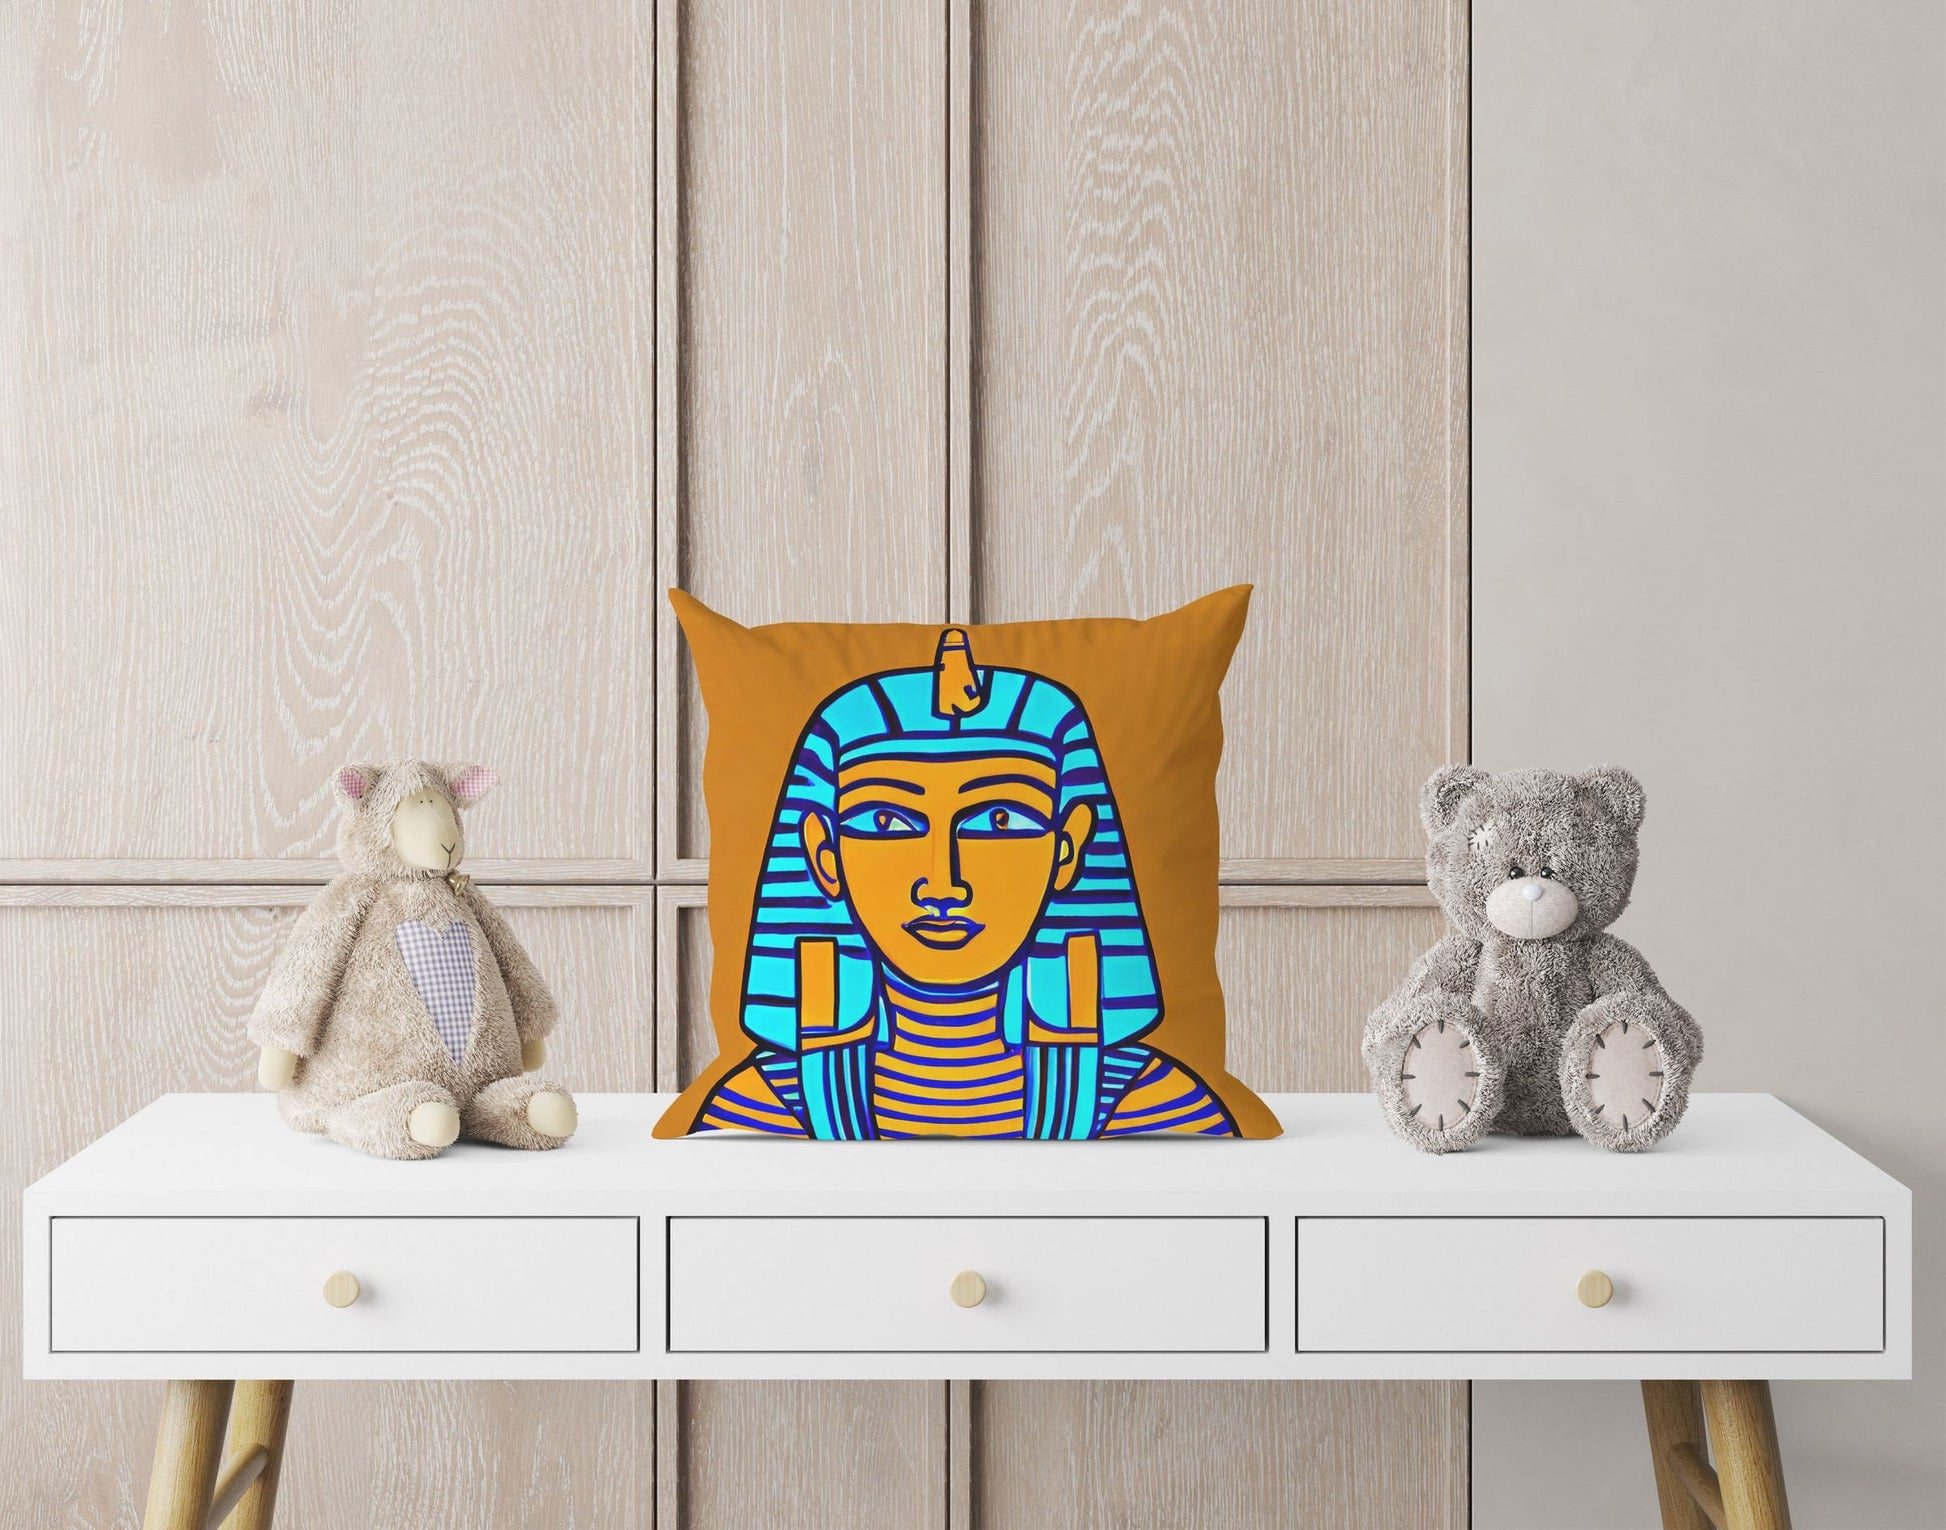 Pharaoh Of Ancient Egypt, Throw Pillow Cover, Abstract Pillow Case, Artist Pillow, Colorful Pillow Case, Modern Pillow, Large Pillow Cases